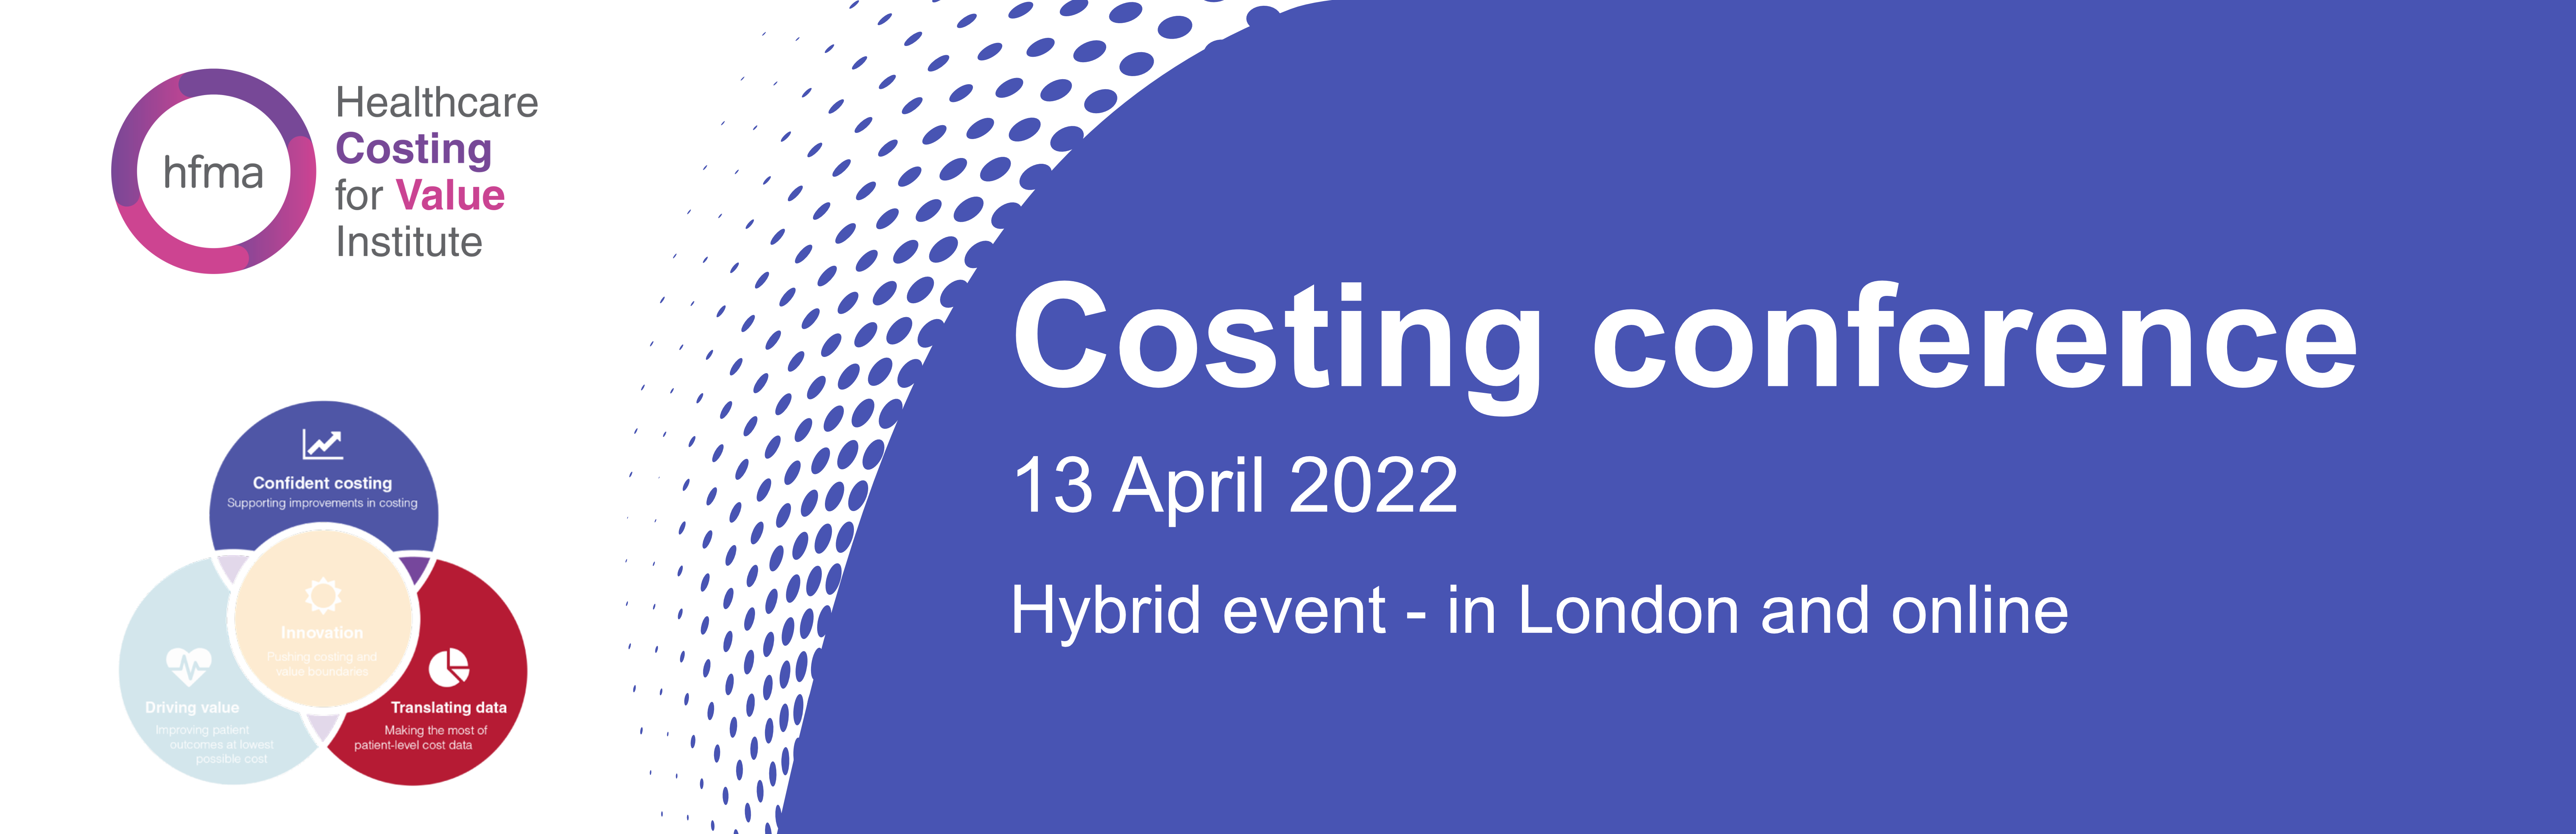 Costing conference 2022